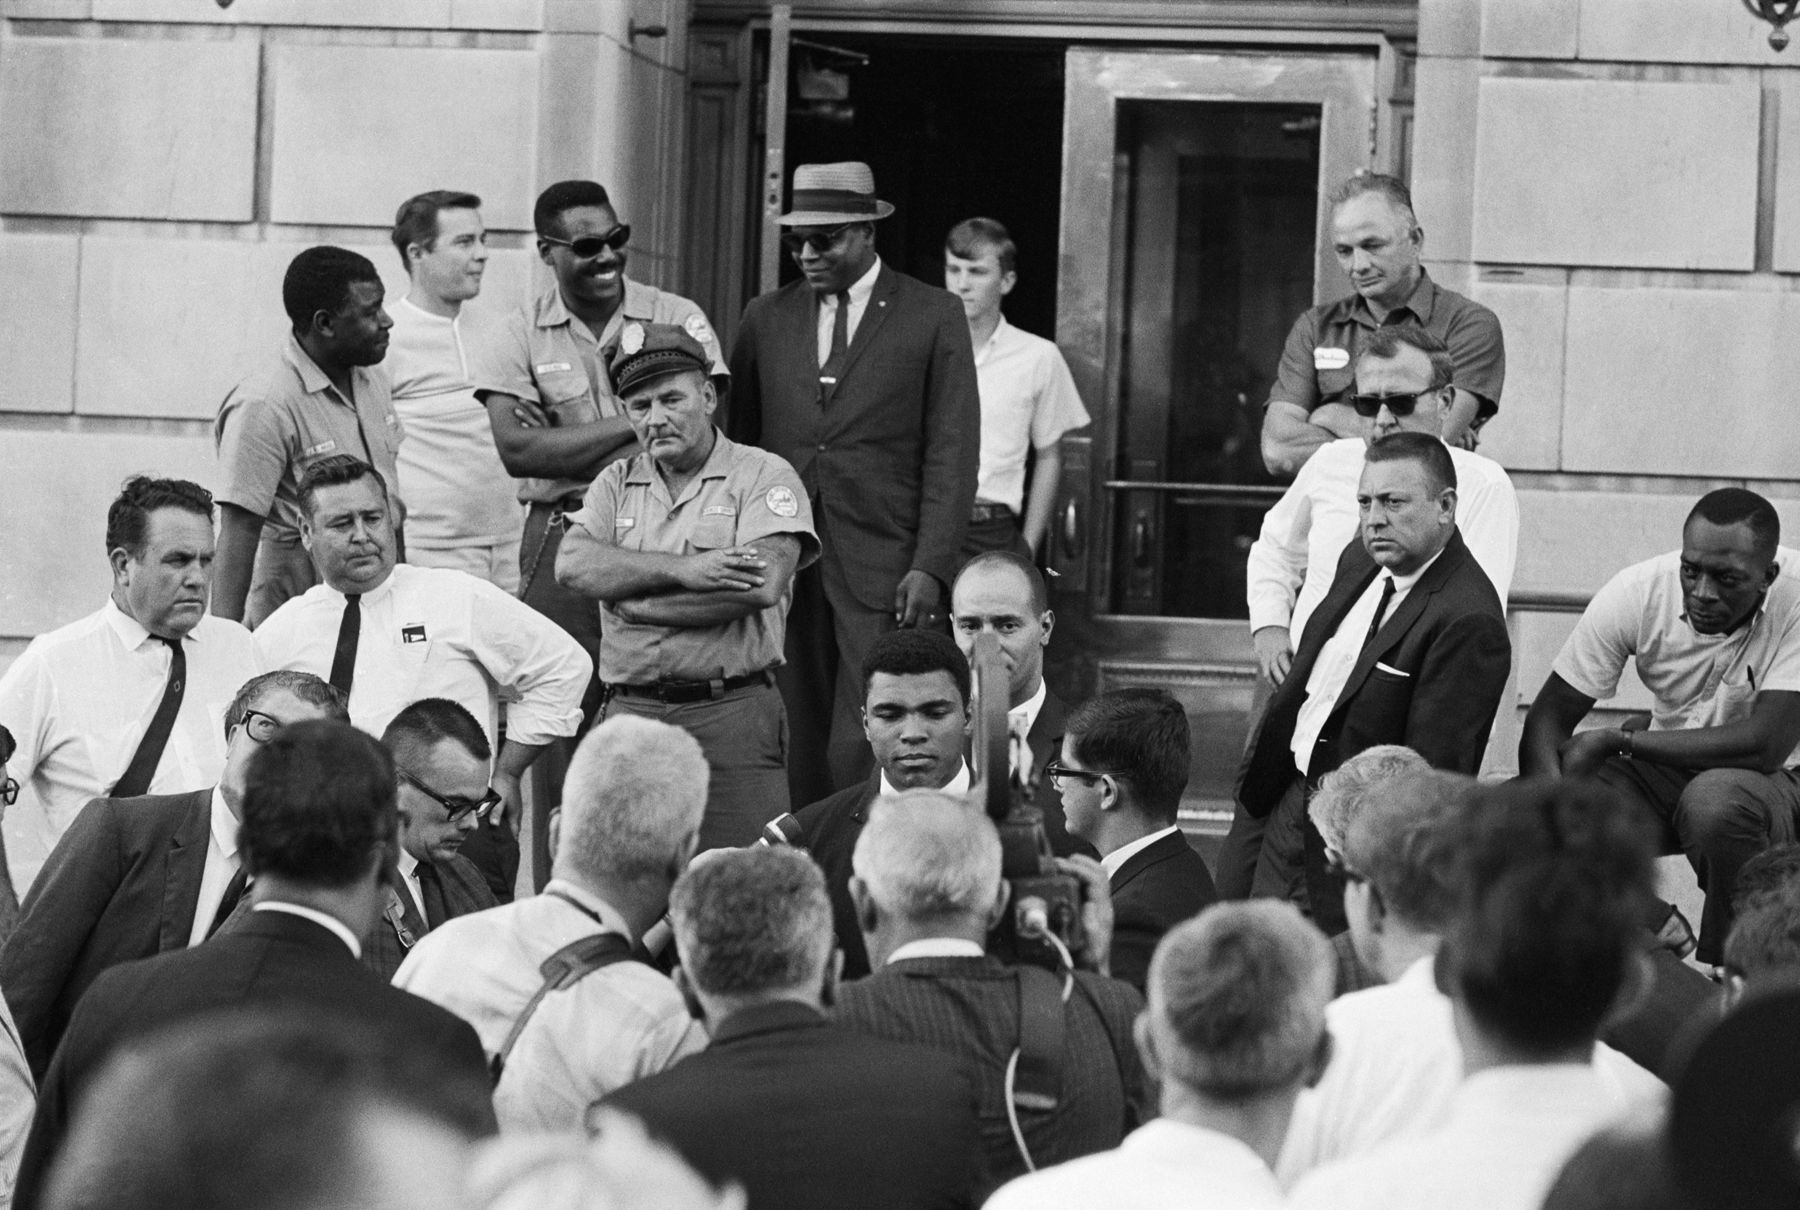 Heavyweight boxing champion Muhammad Ali holds an impromptu press conference in his hometown of Louisville, Kentucky, after refusing to take an induction oath.